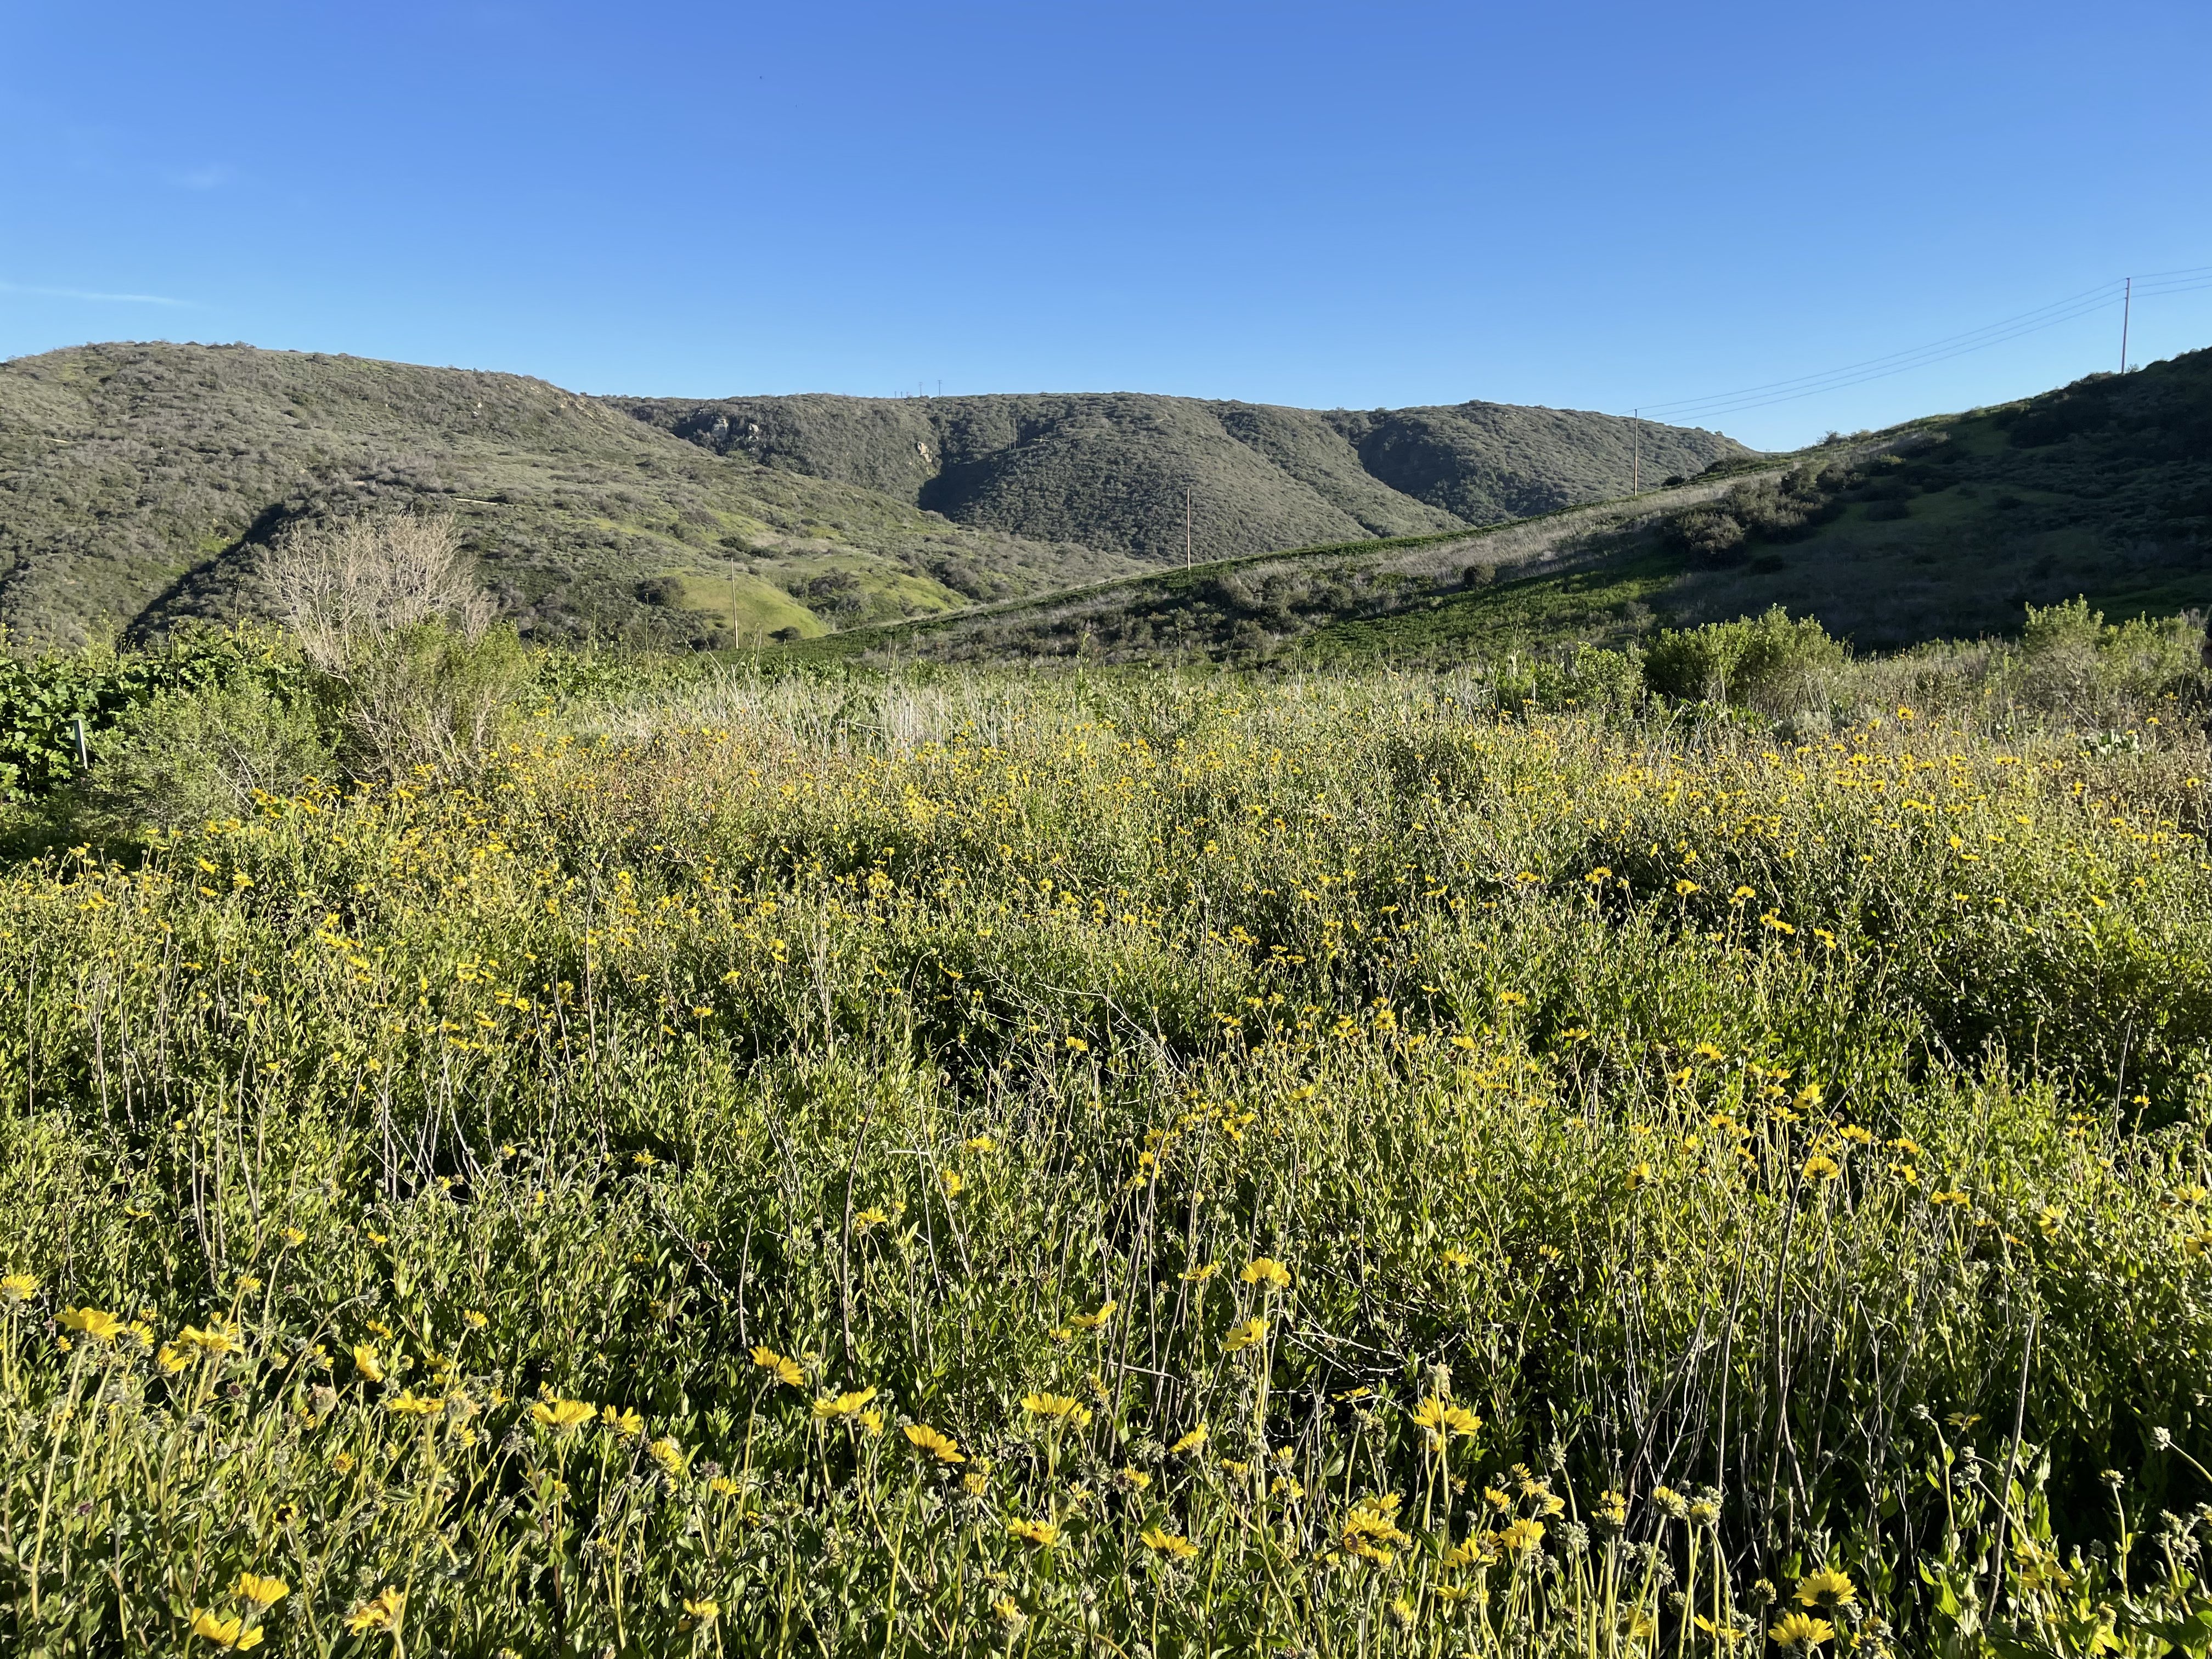 Coastal sage scrub vegetation and perennial grasslands in the Moro Canyon,Volunteers pose for a picture on a trail in the Edgewood County Park and Natural Preserve in San Mateo County